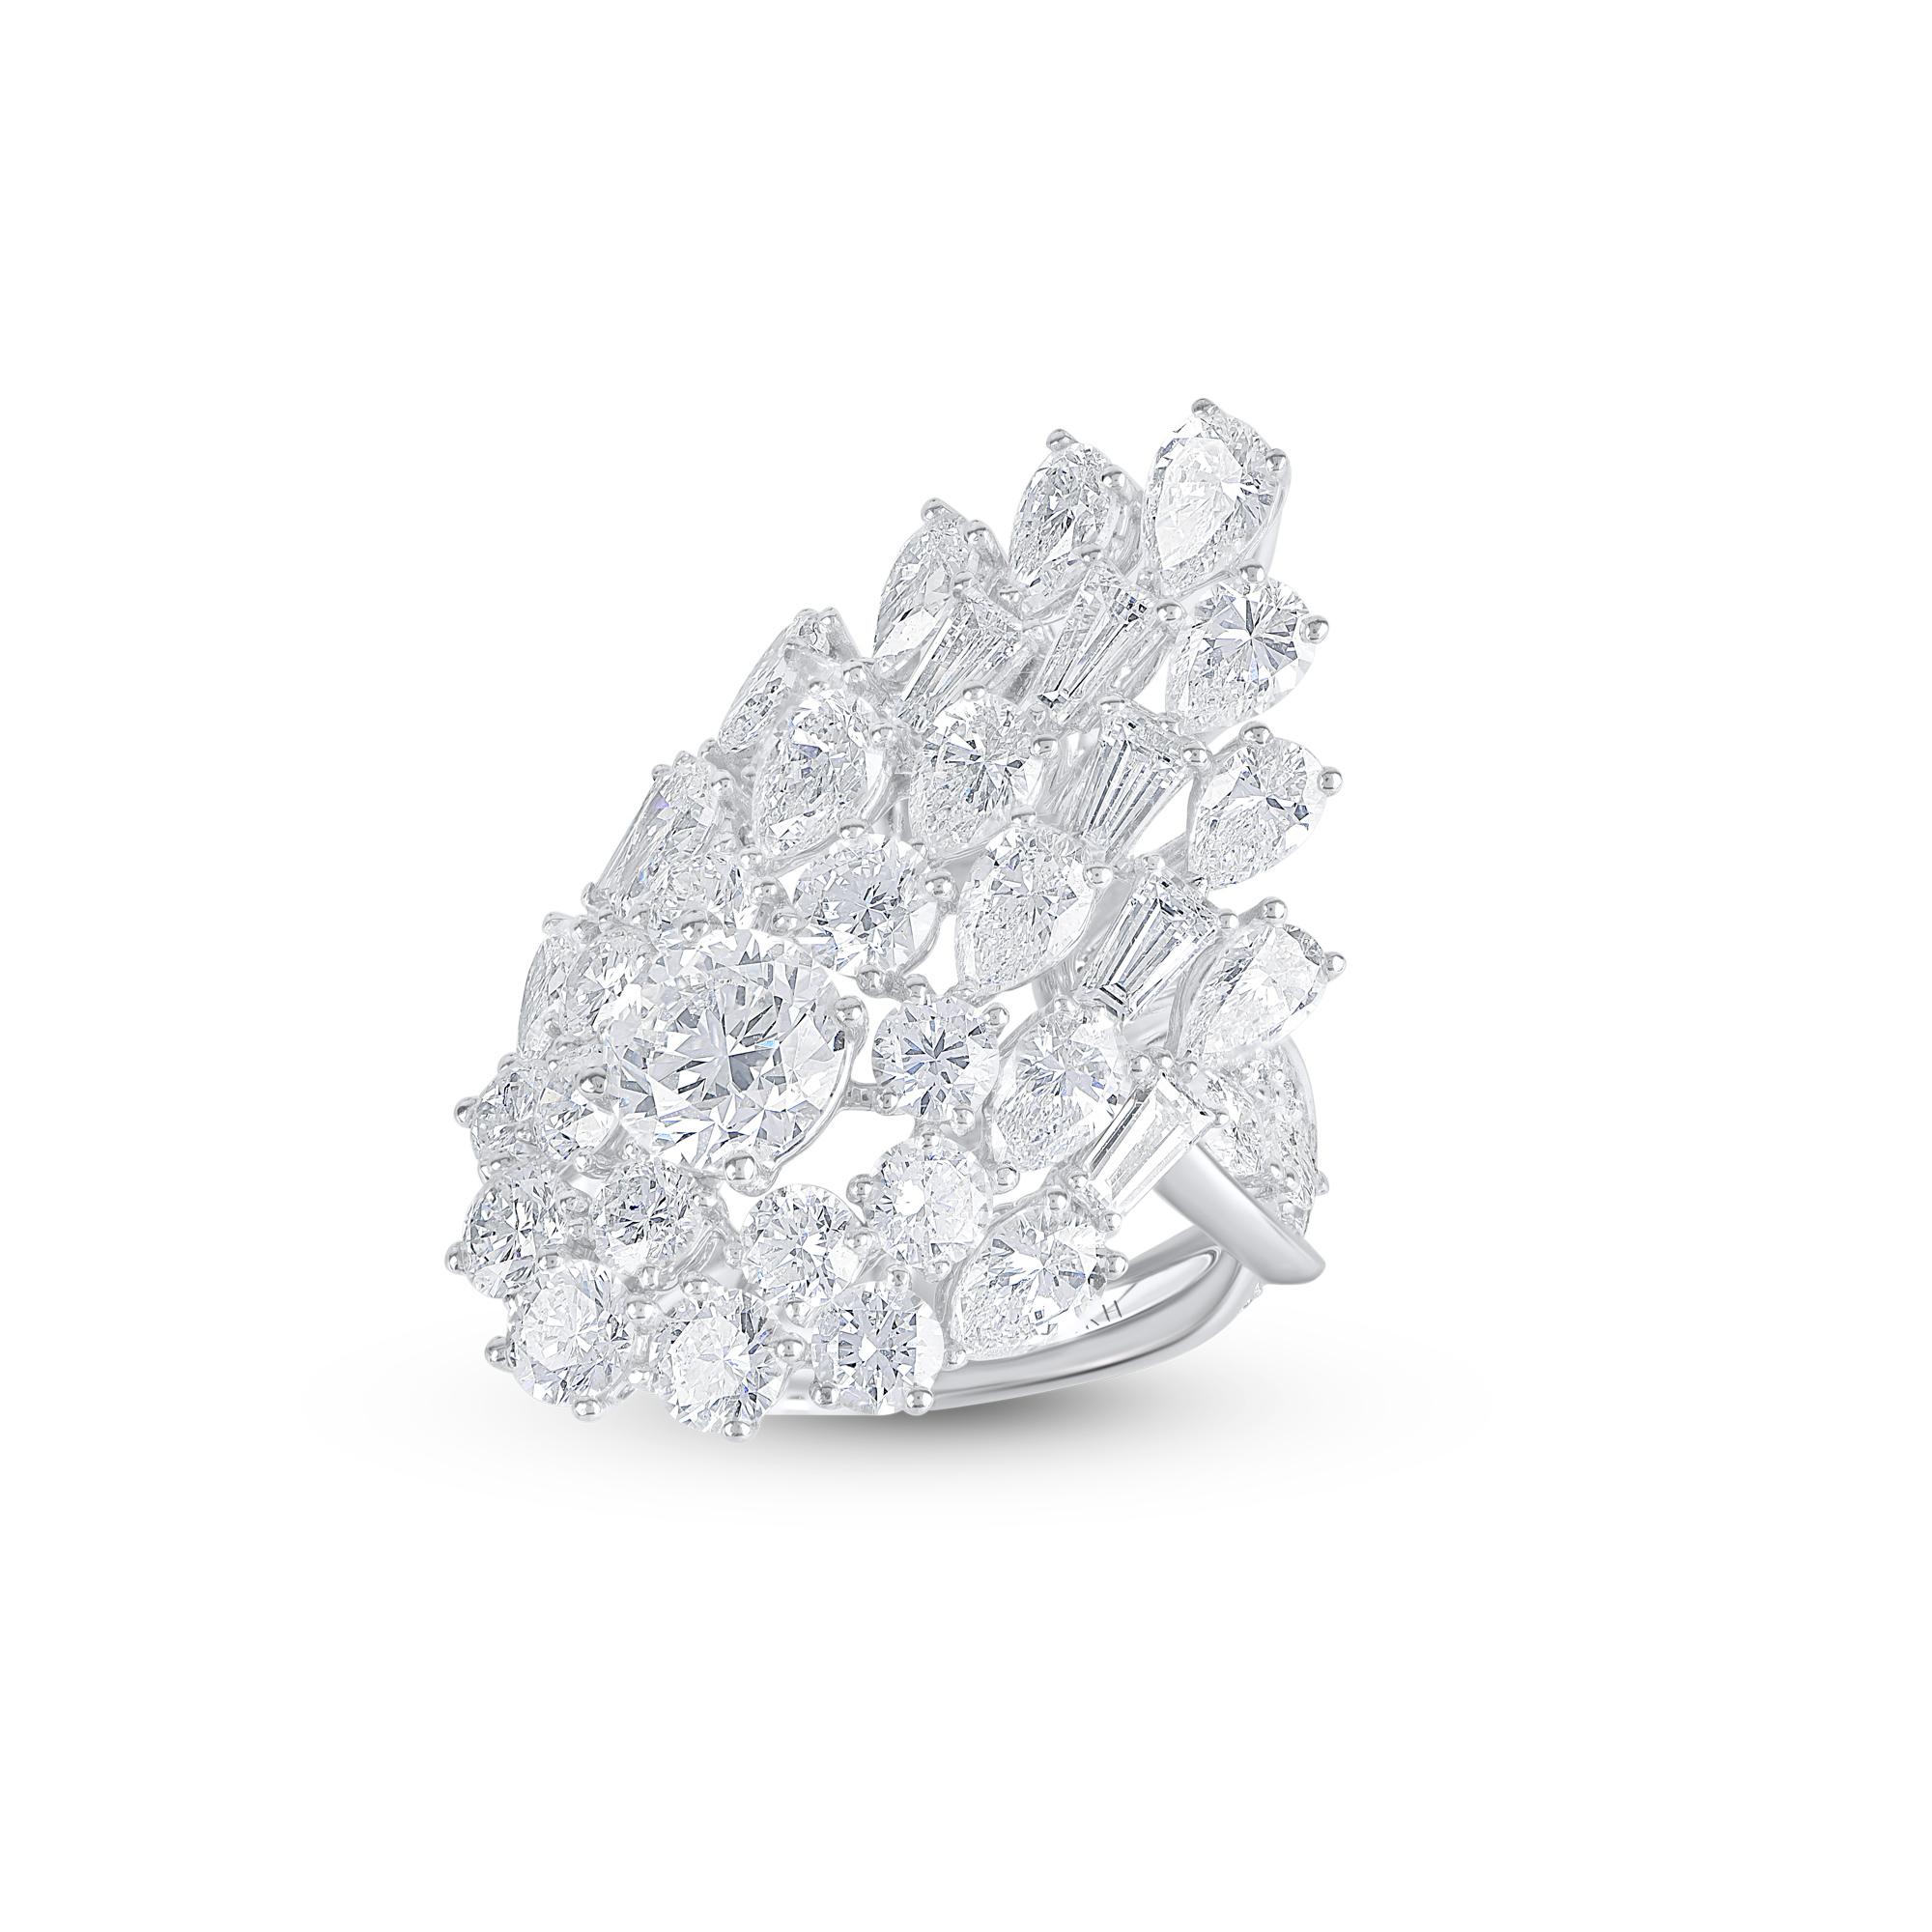 Designed in a unique way to mimic the handsome feathers of a blooming peacock, this ring is studded with 60 brilliant round diamonds including a GIA certified 1.01 carat center stone, 7 baguettes and 18 pear shaped diamonds and is crafted in 18 kt